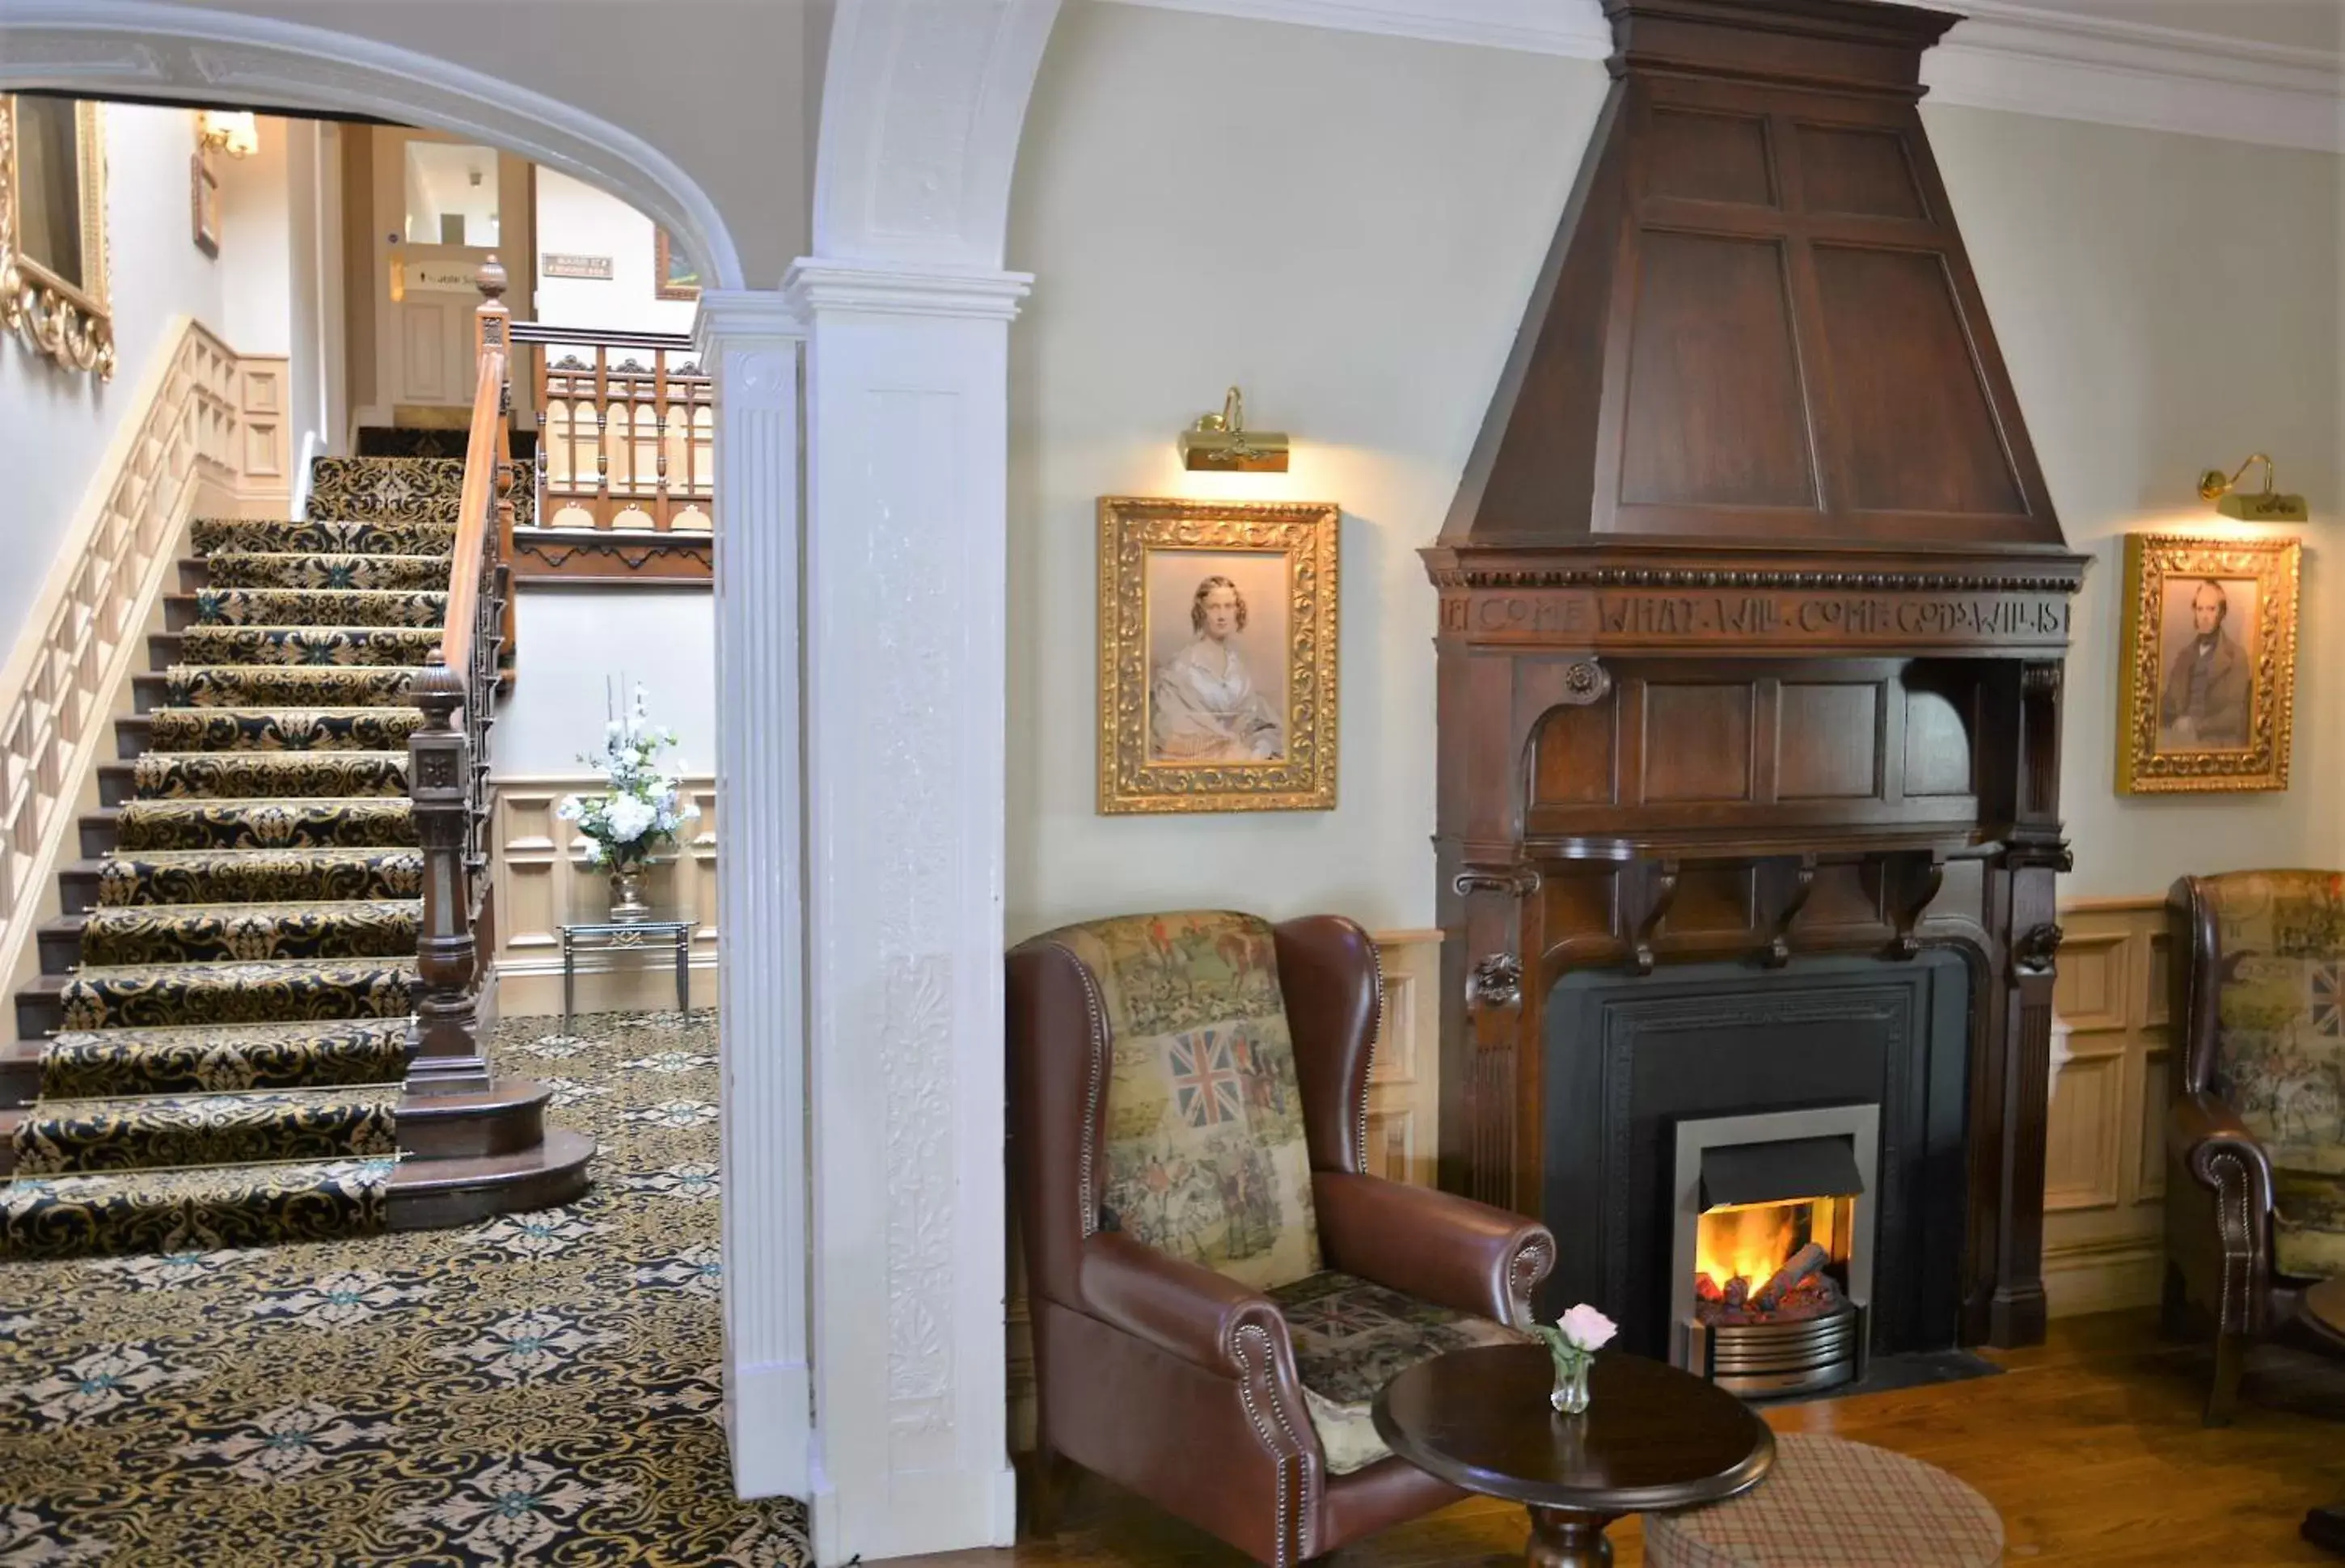 Area and facilities, Seating Area in Stone House Hotel ‘A Bespoke Hotel’